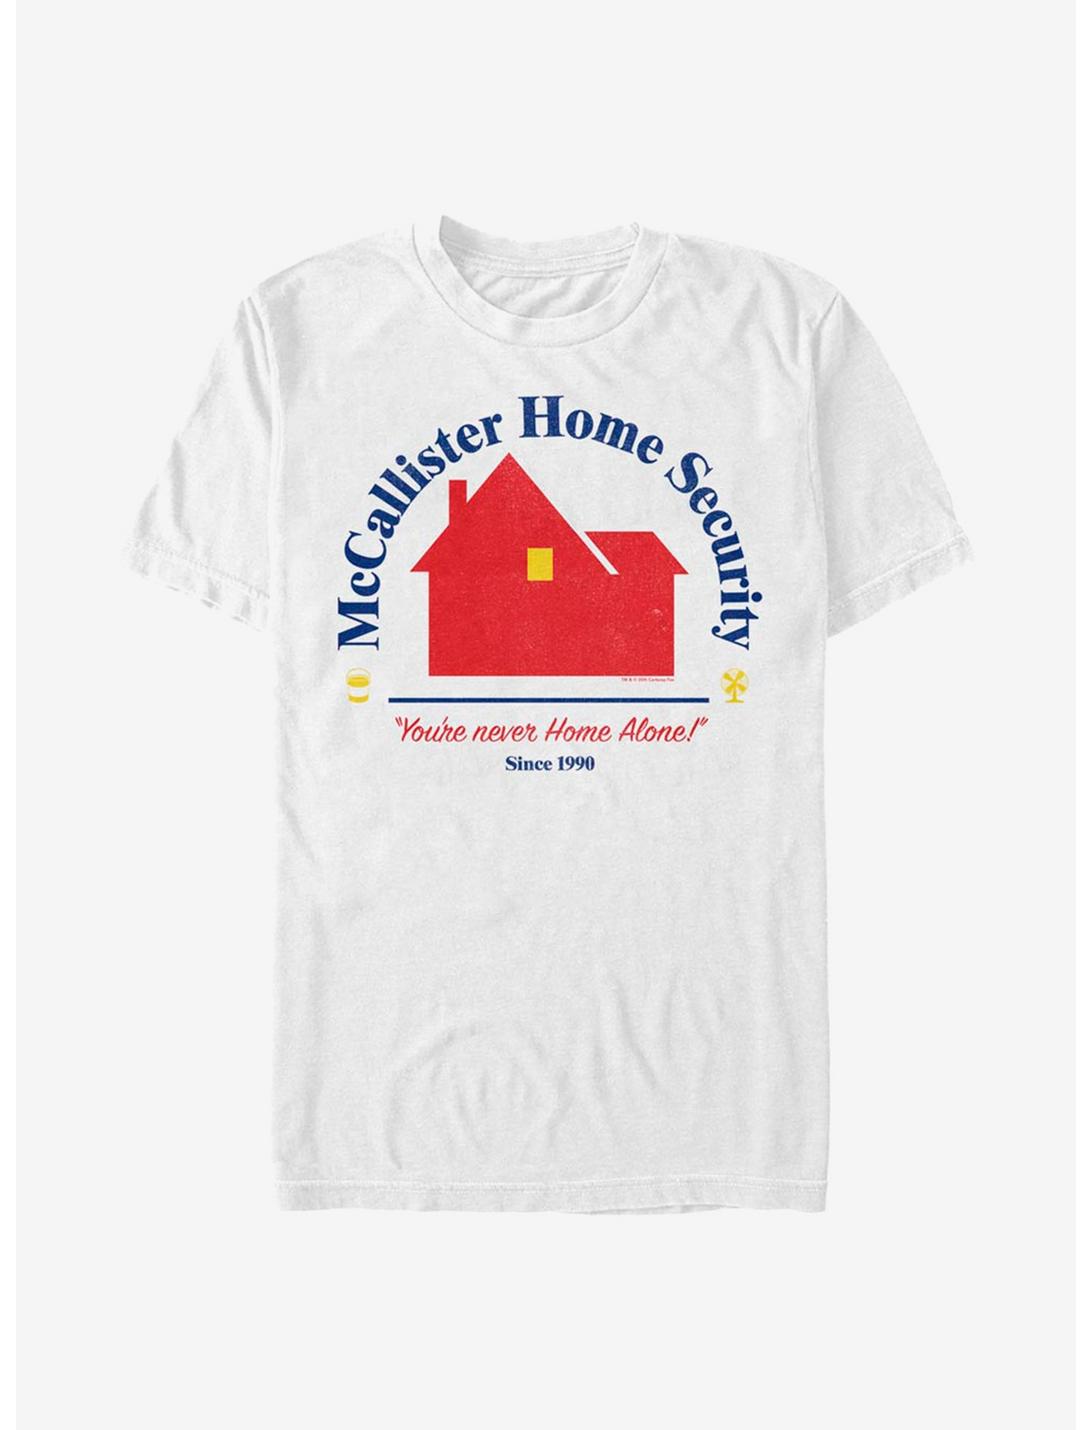 Home Alone Home Security T-Shirt, WHITE, hi-res